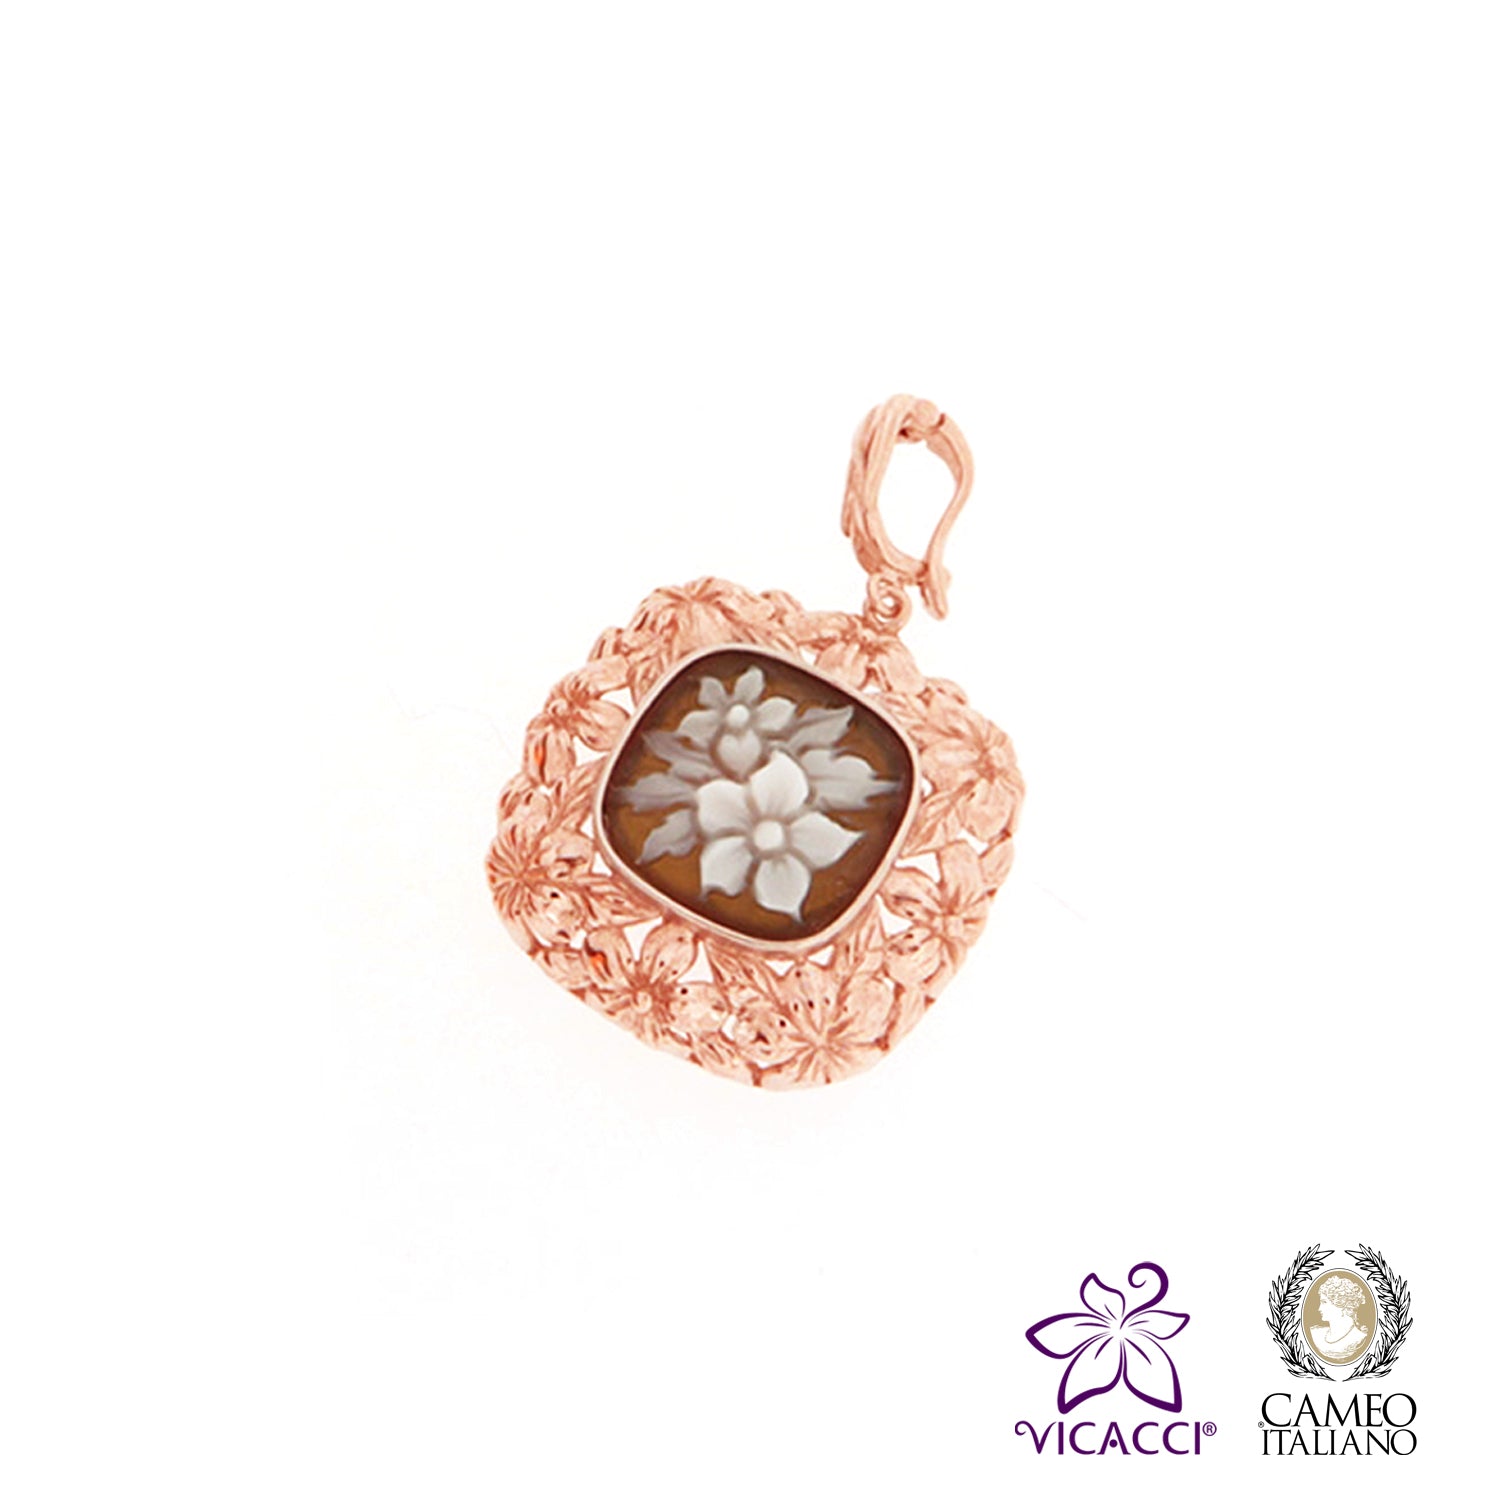 Cameo Italiano, P30 Pendant , Rose Gold Plated Sterling Silver